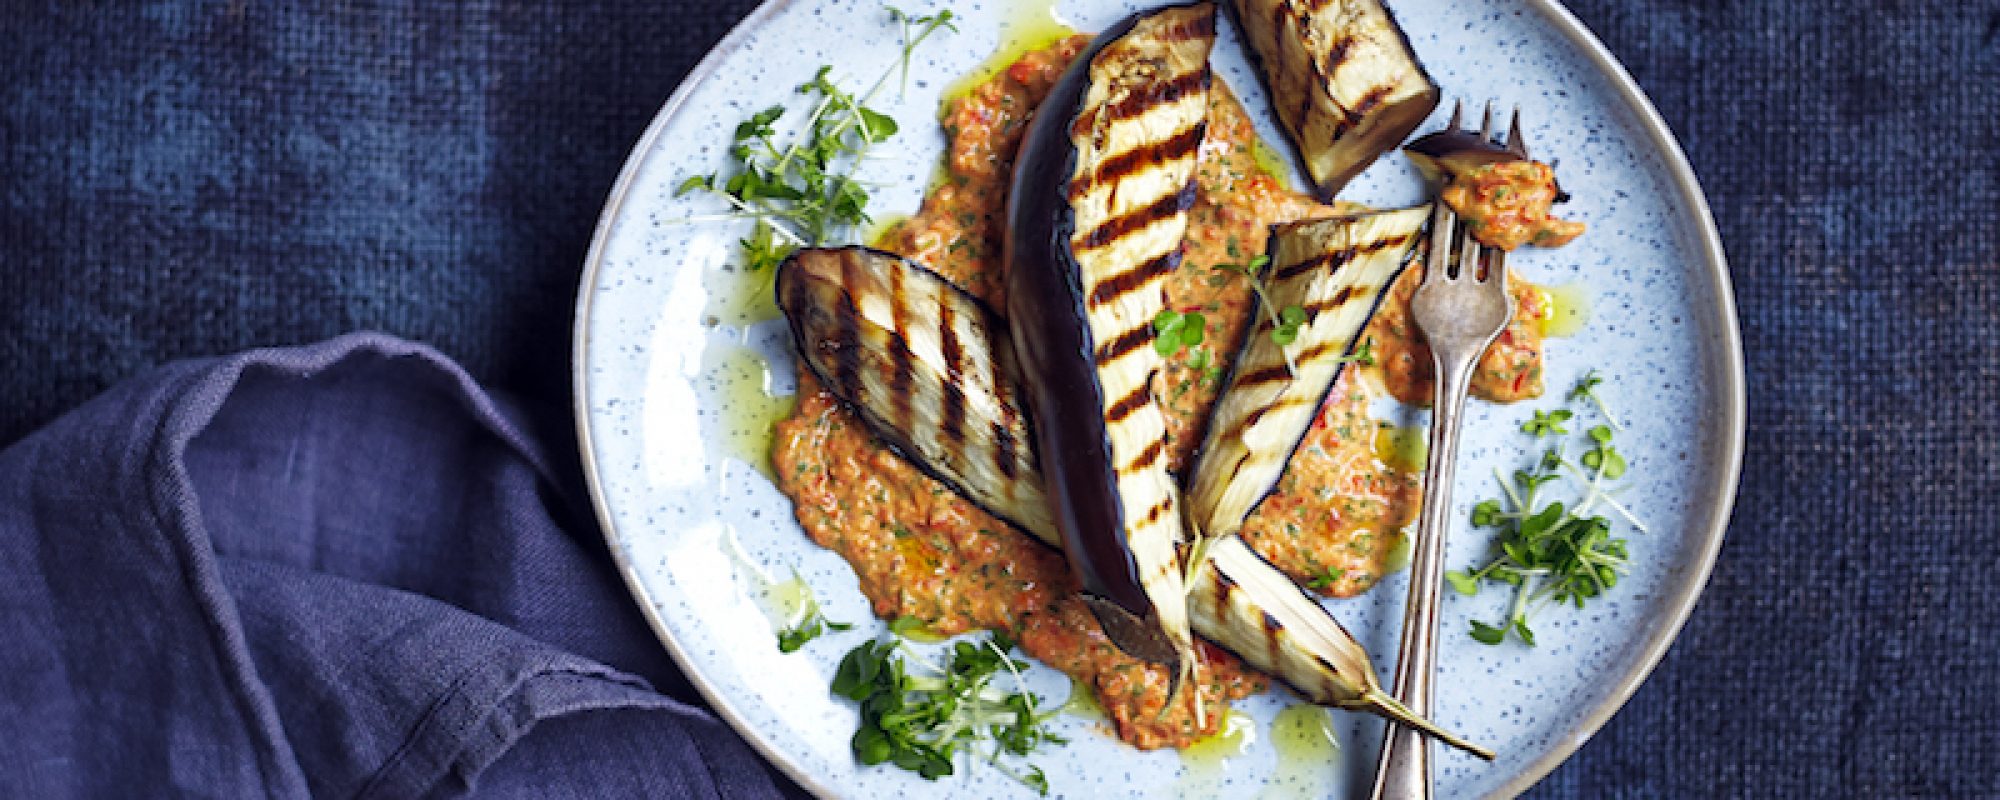 Roasted Aubergine with Salad Cress and Red Pepper Houmous